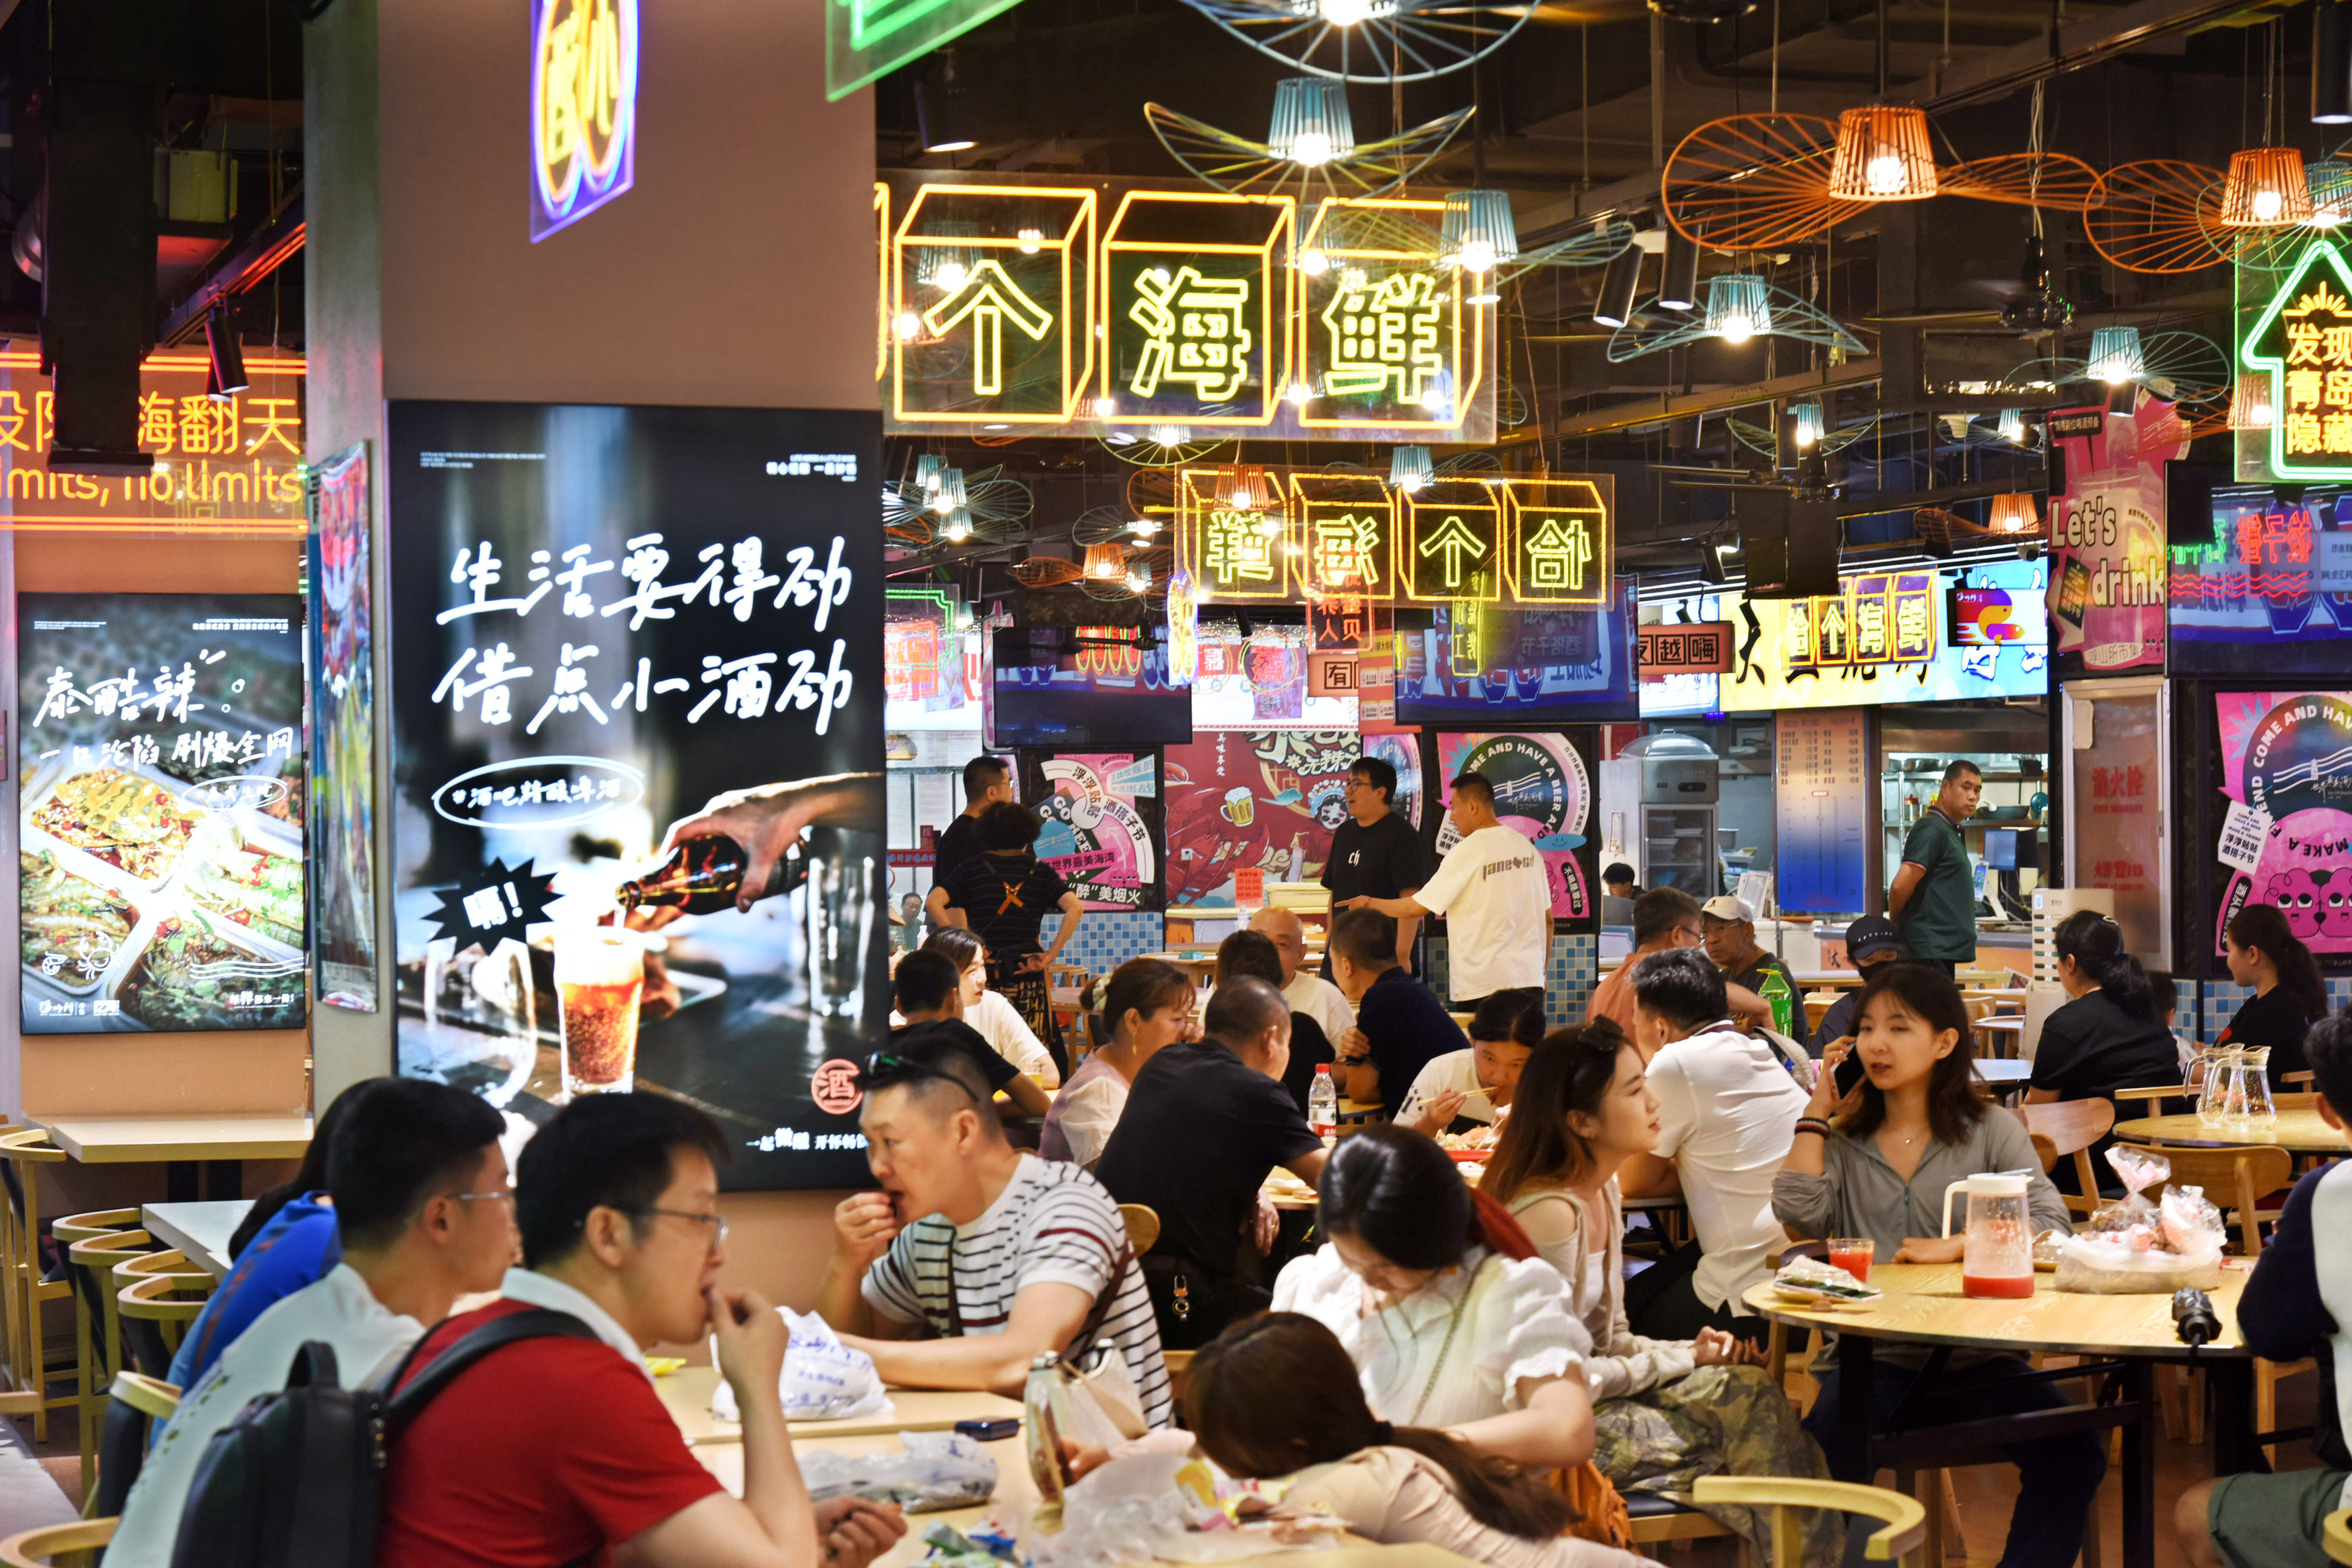 People dine at the Fushansuo Market in Shinan District of Qingdao, east China’s Shandong Province. Photo: Xinhua